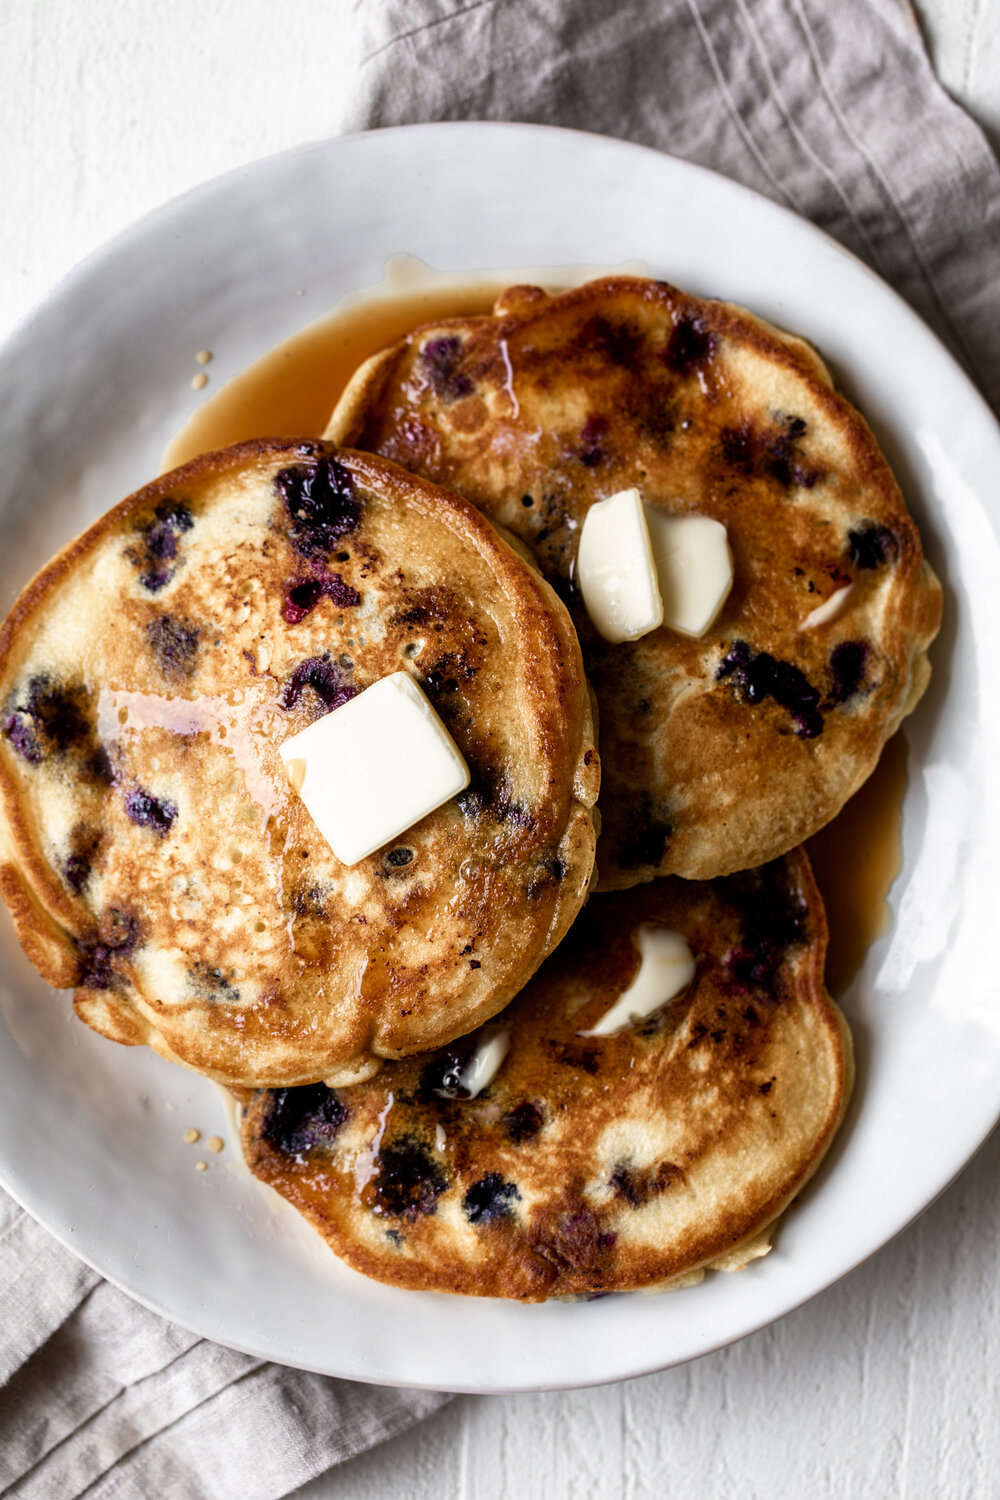 These blueberry pancakes are made with equal parts cornmeal and flour and loaded with juicy blueberries for a delicious summer breakfast.